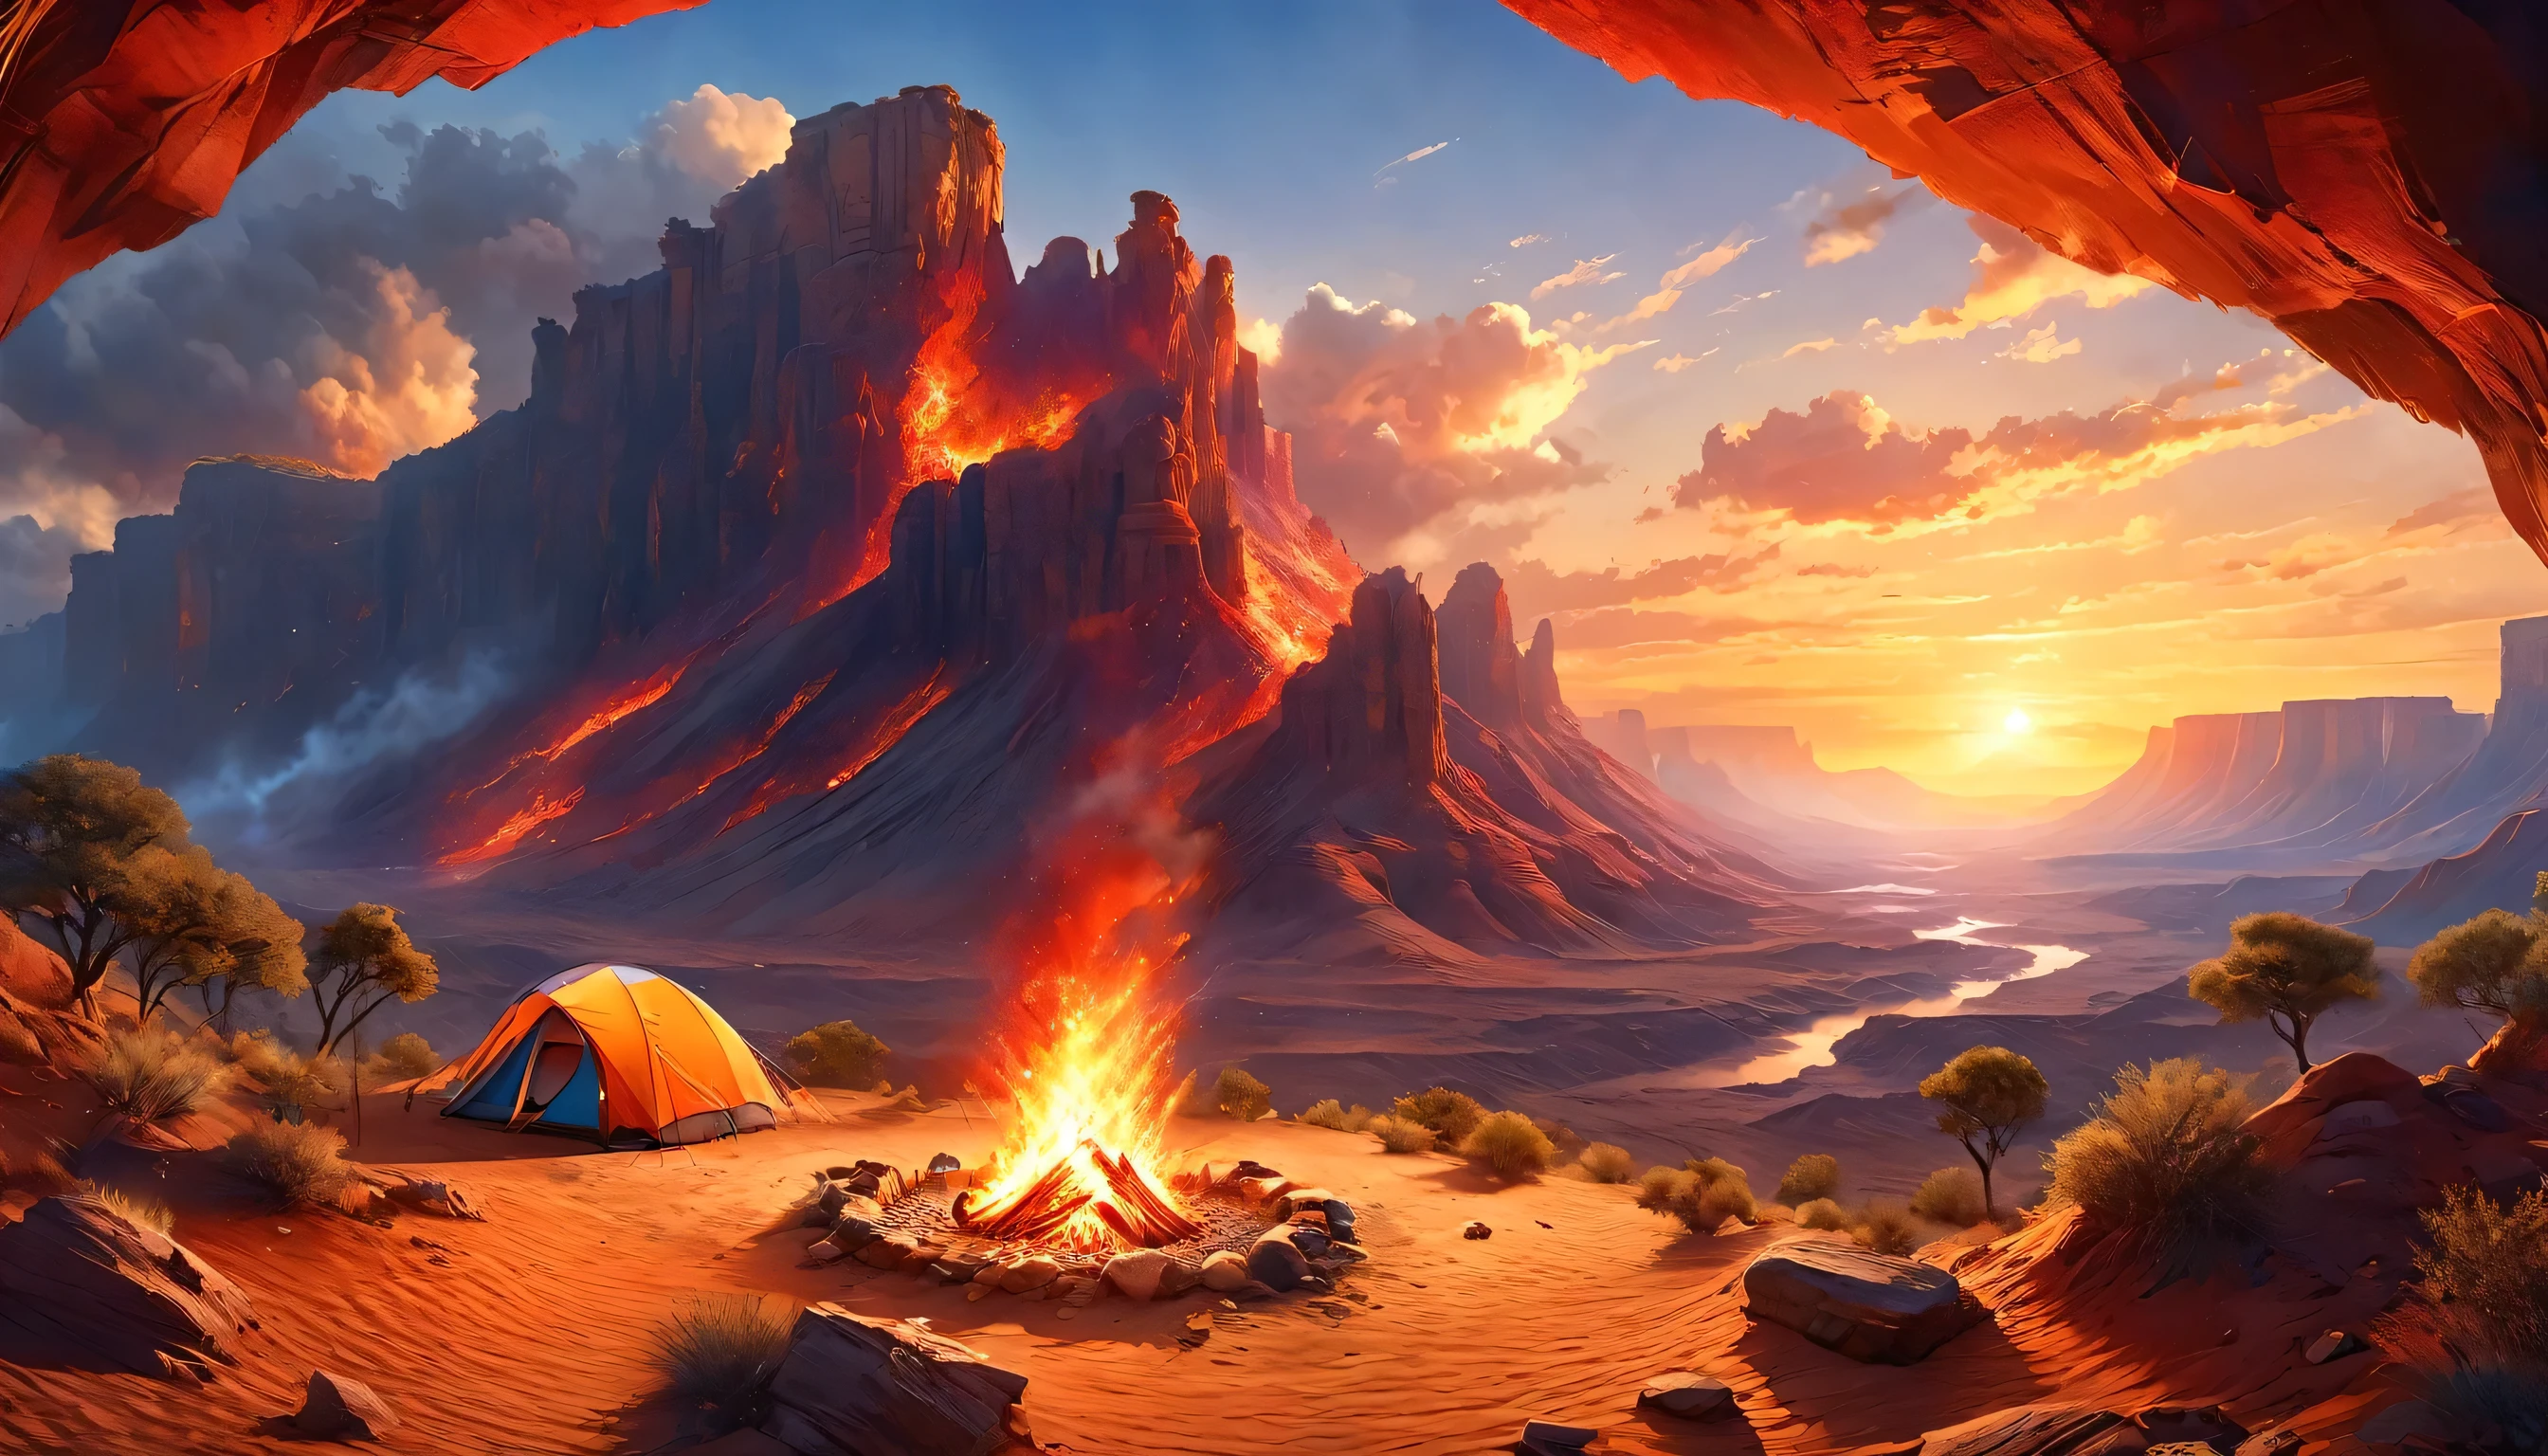 arafed, a picture of a camping (tent: 1.2) and small (campfire: 1,2), on a desert mountaintop, its sunset the sky are in various shades of  (red: 1.1), (orange: 1.1), (azure: 1.1) (purple:1.1) there is smoke rising from the fire camp, there is a magnificent view of the desert canyon and ravines, there is sparce trees on the horizon, it is a time of serenity, peace, and relaxation, best quality, 16K,  photorealism, National Geographic award winning photoshoot, ultra wide shot, RagingNebula, ladyshadow